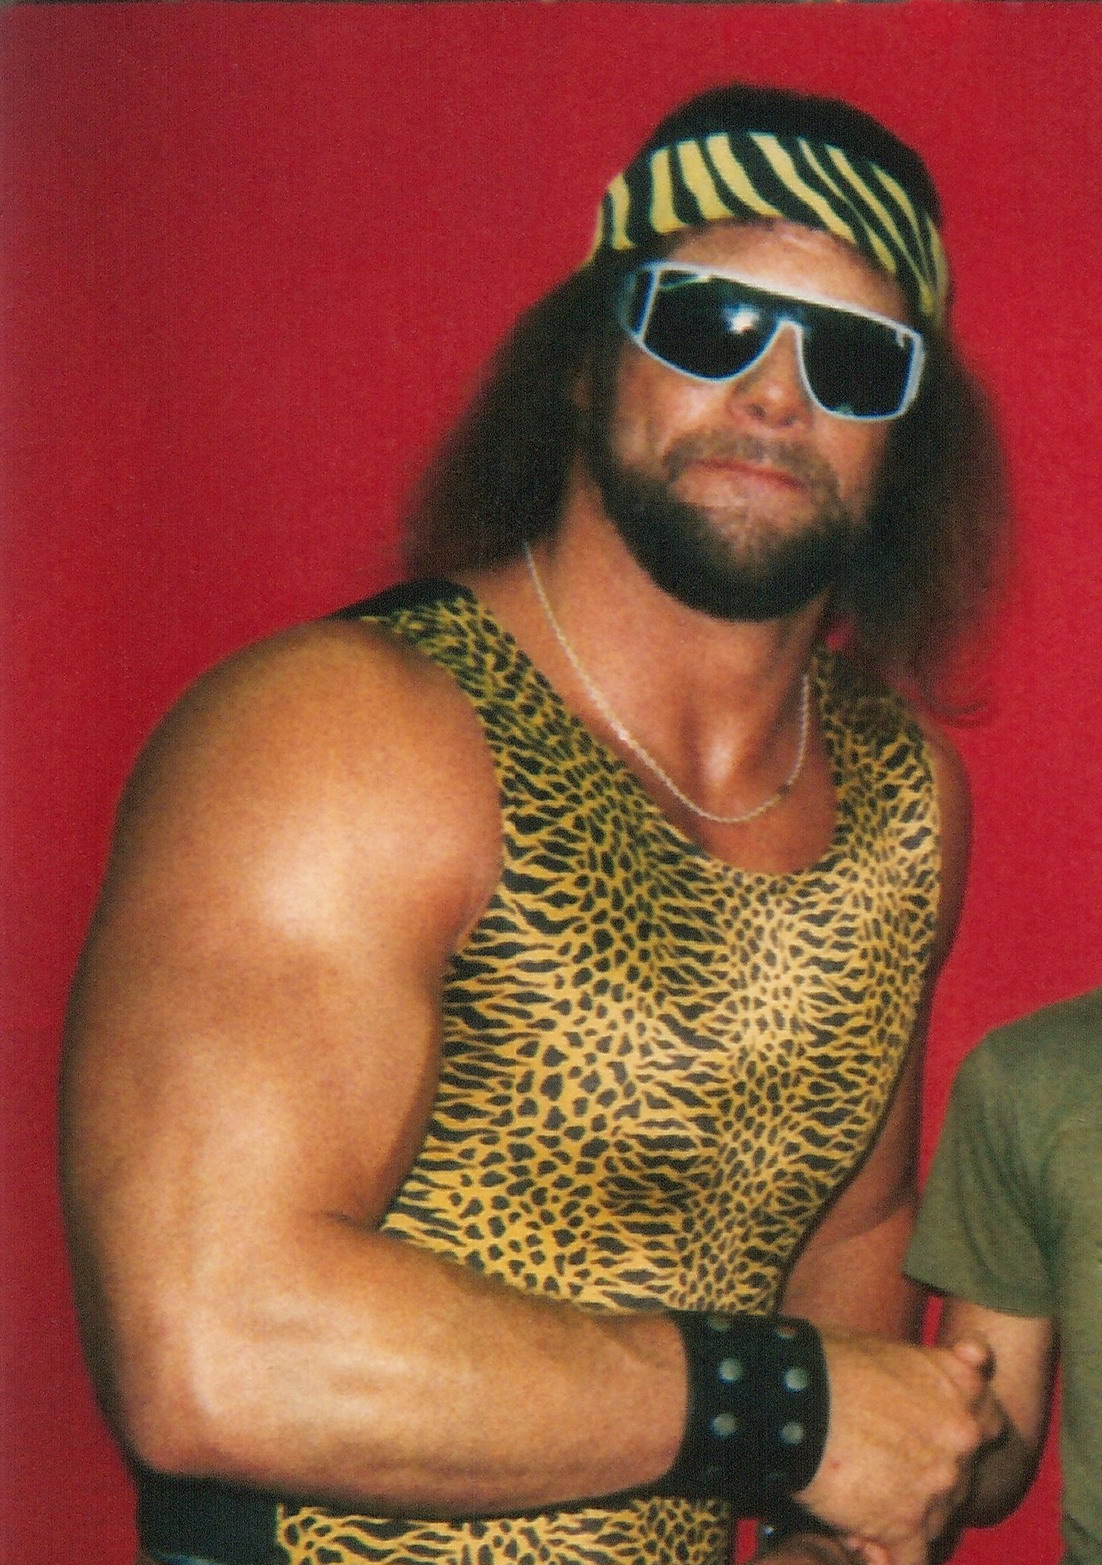 pels oase flyde over Randy Savage - Wikipedia